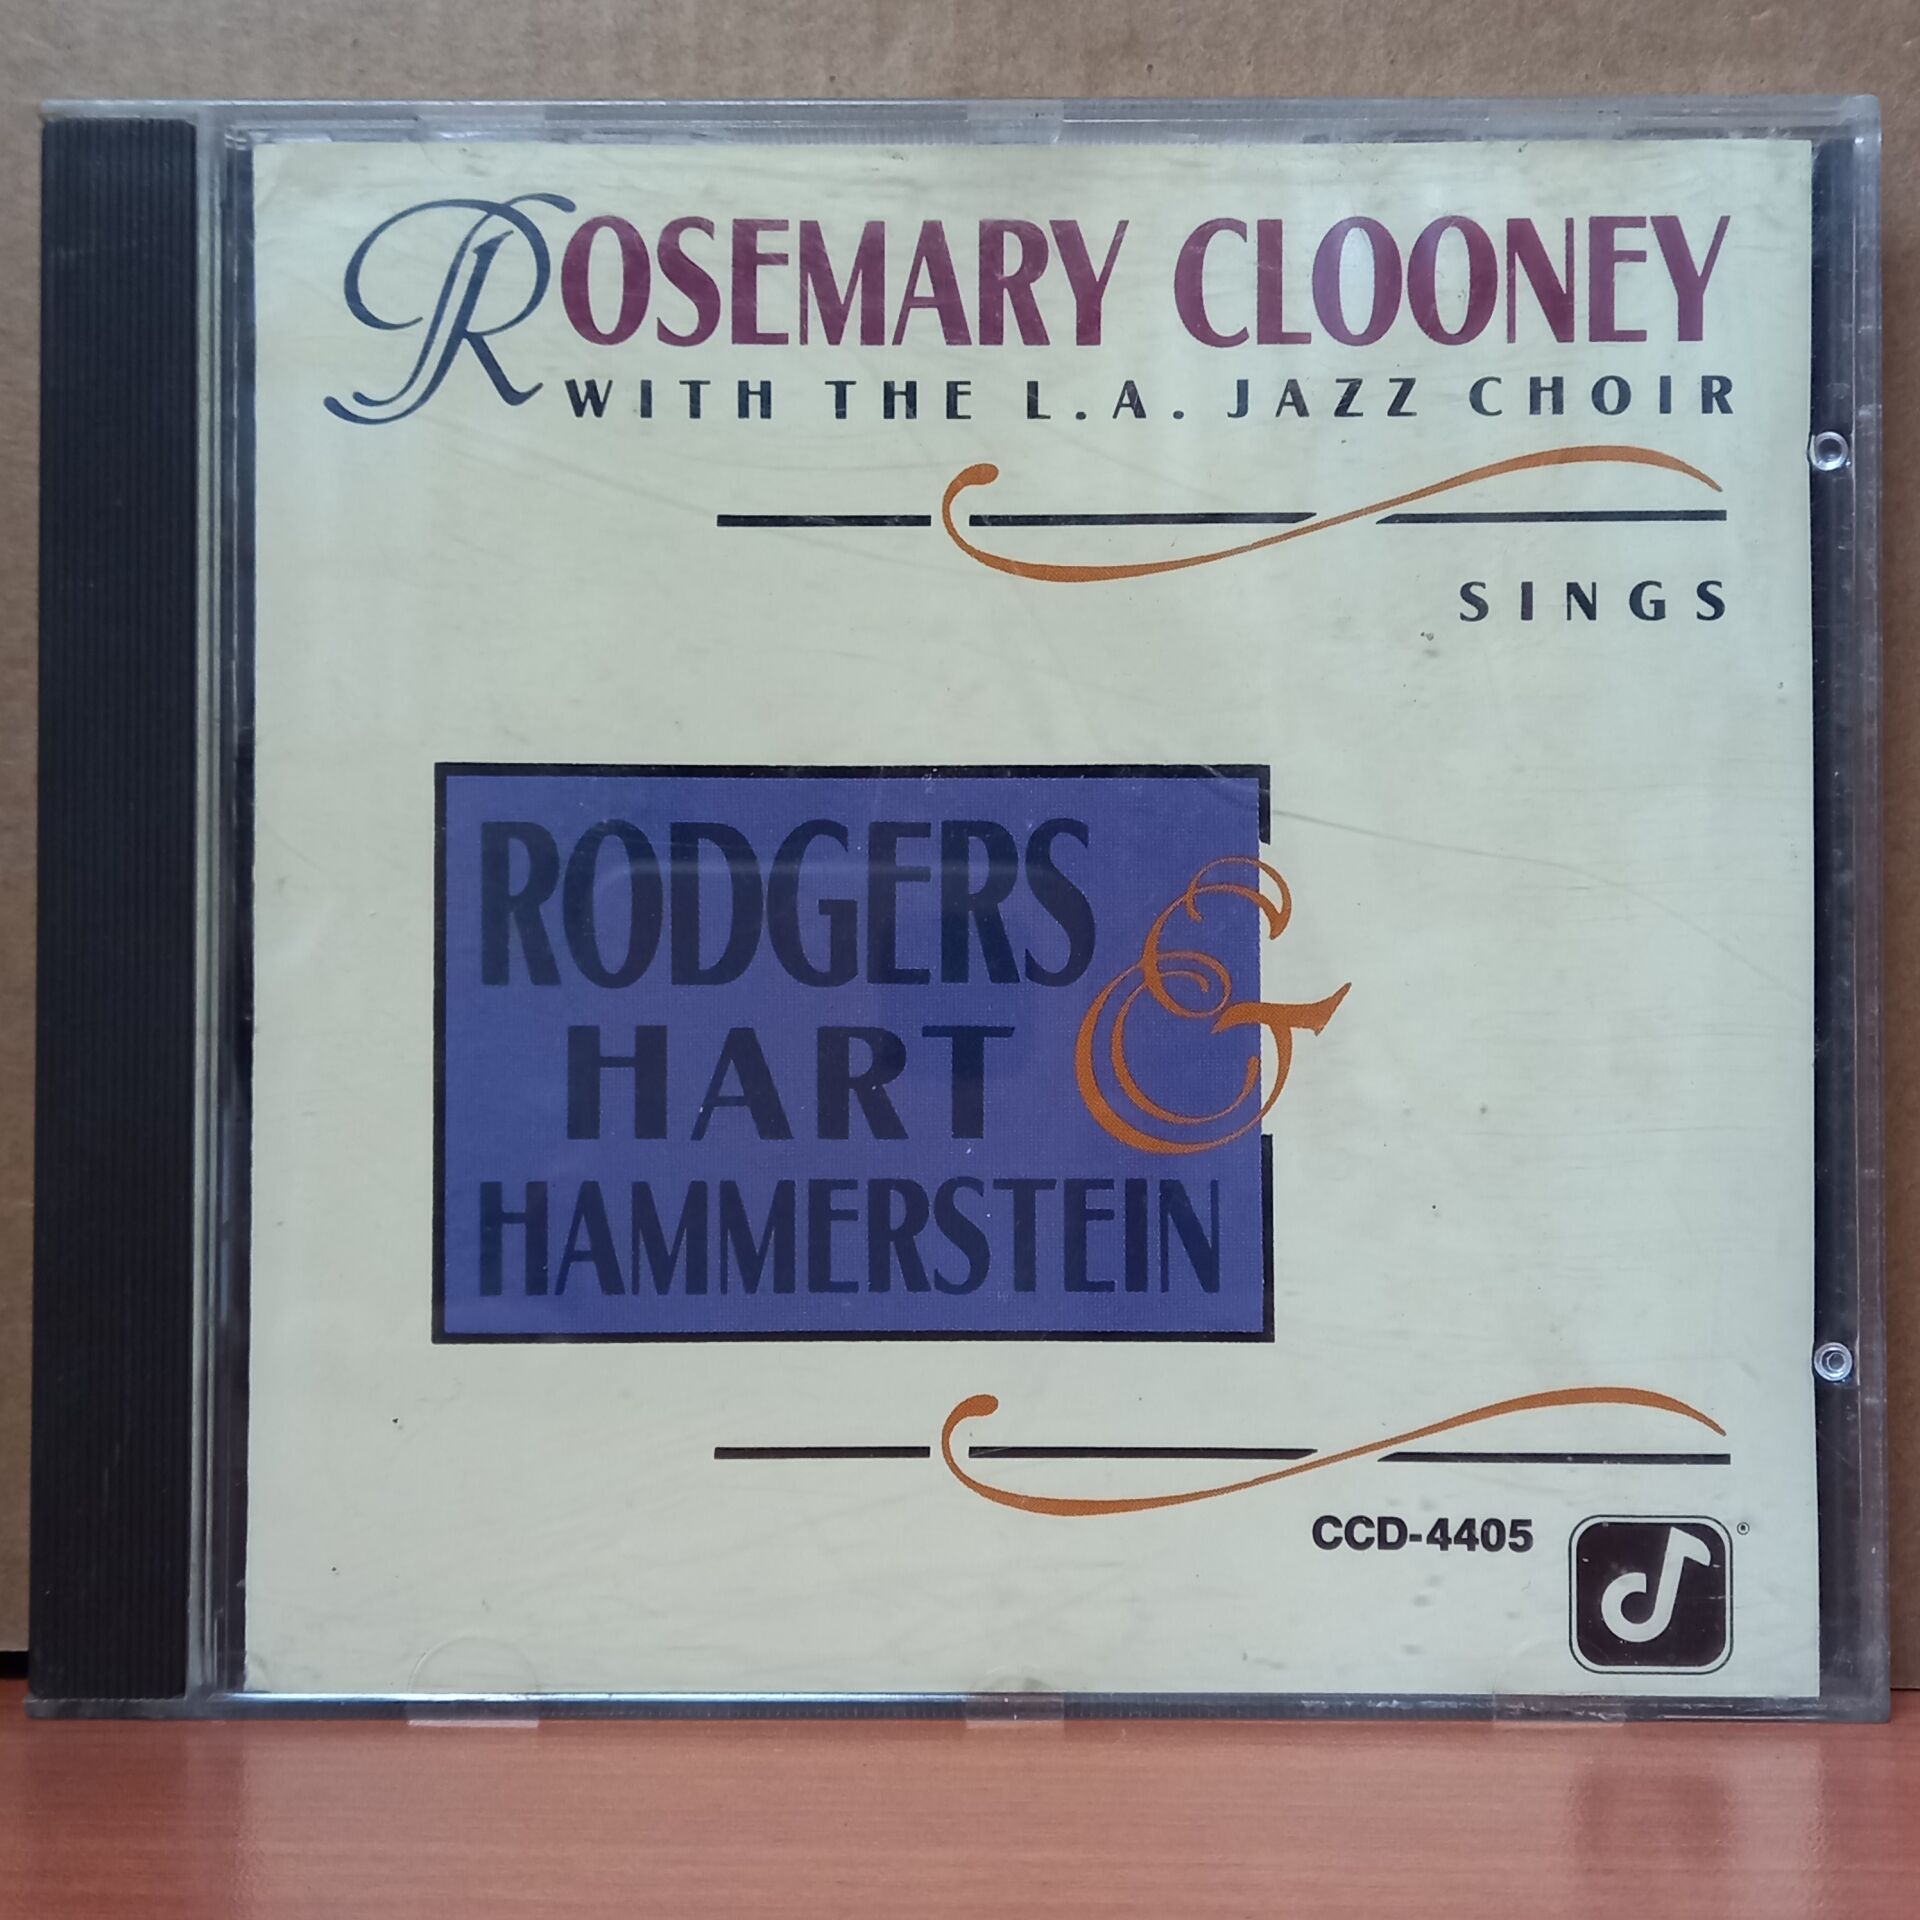 ROSEMARY CLOONEY WITH THE L.A. JAZZ CHOIR – ROSEMARY CLOONEY SINGS RODGERS, HART & HAMMERSTEIN (1990) - CD 2.EL